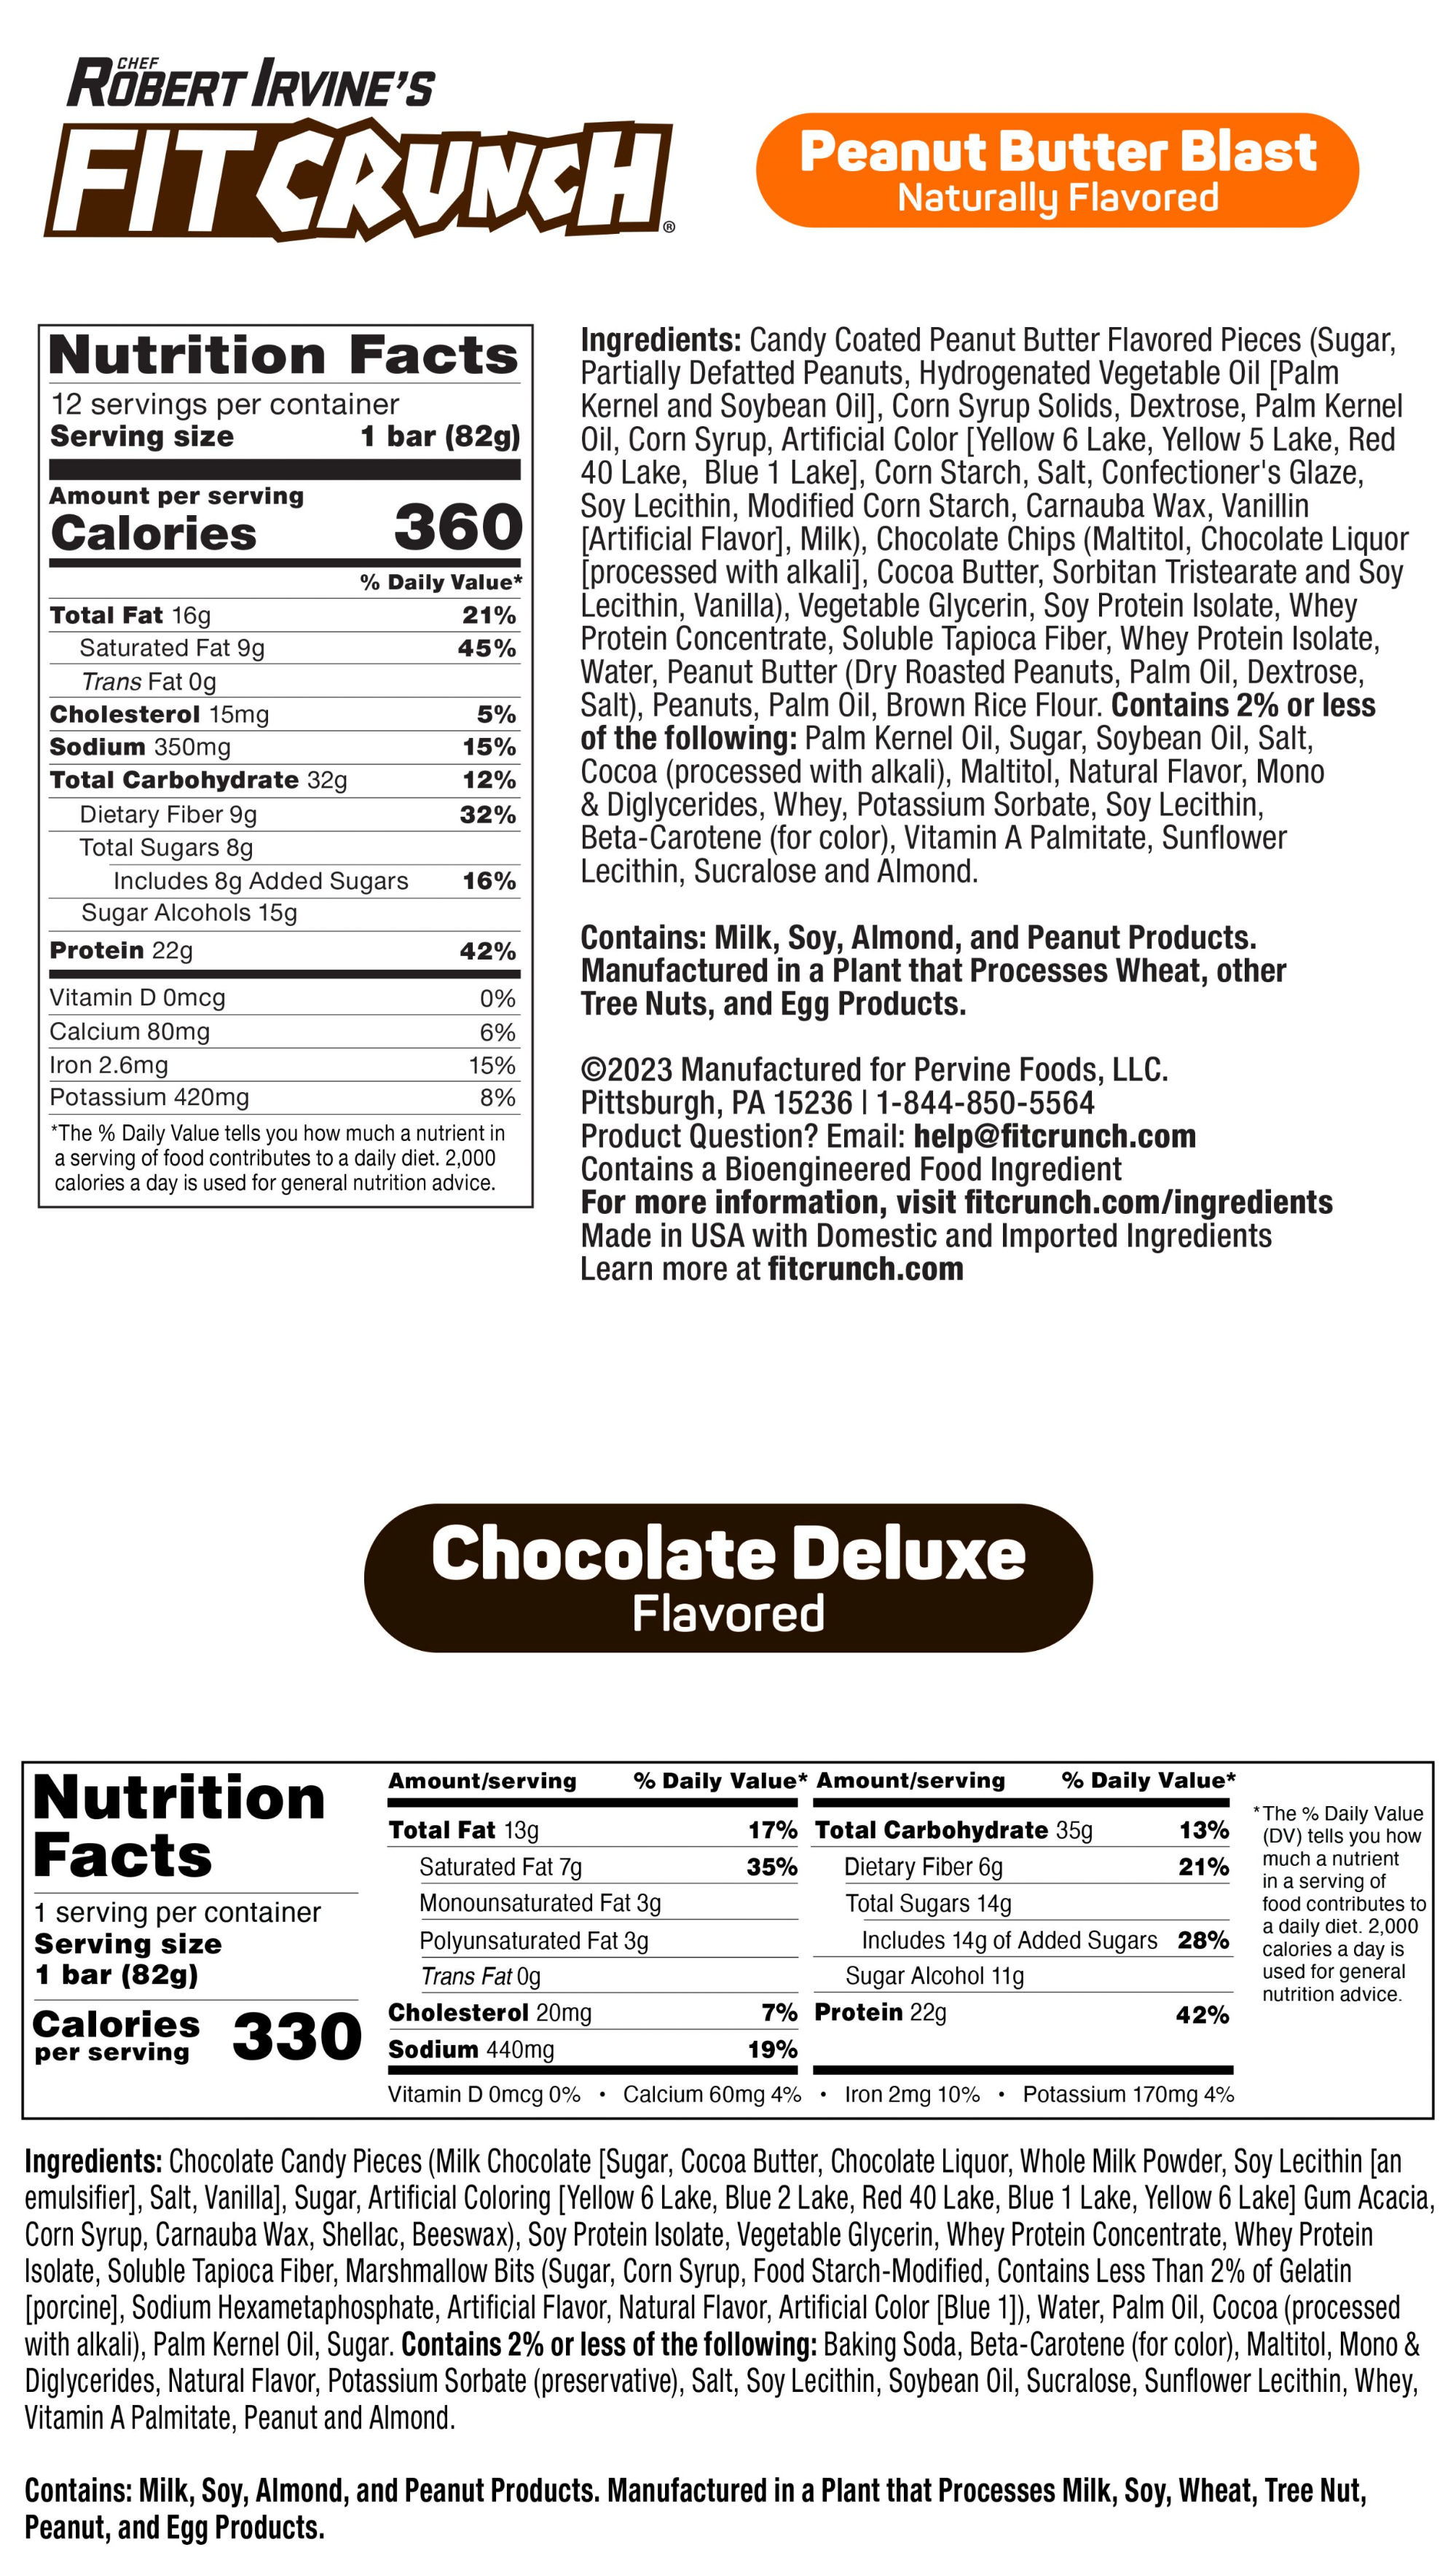 Nutritional information for ROBERT IRVINE'S FIT CRUNCH bars, each contains 16g of Fat, 9g of Fiber, 22g of protein. Contains milk, soy, almond, and peanuts.